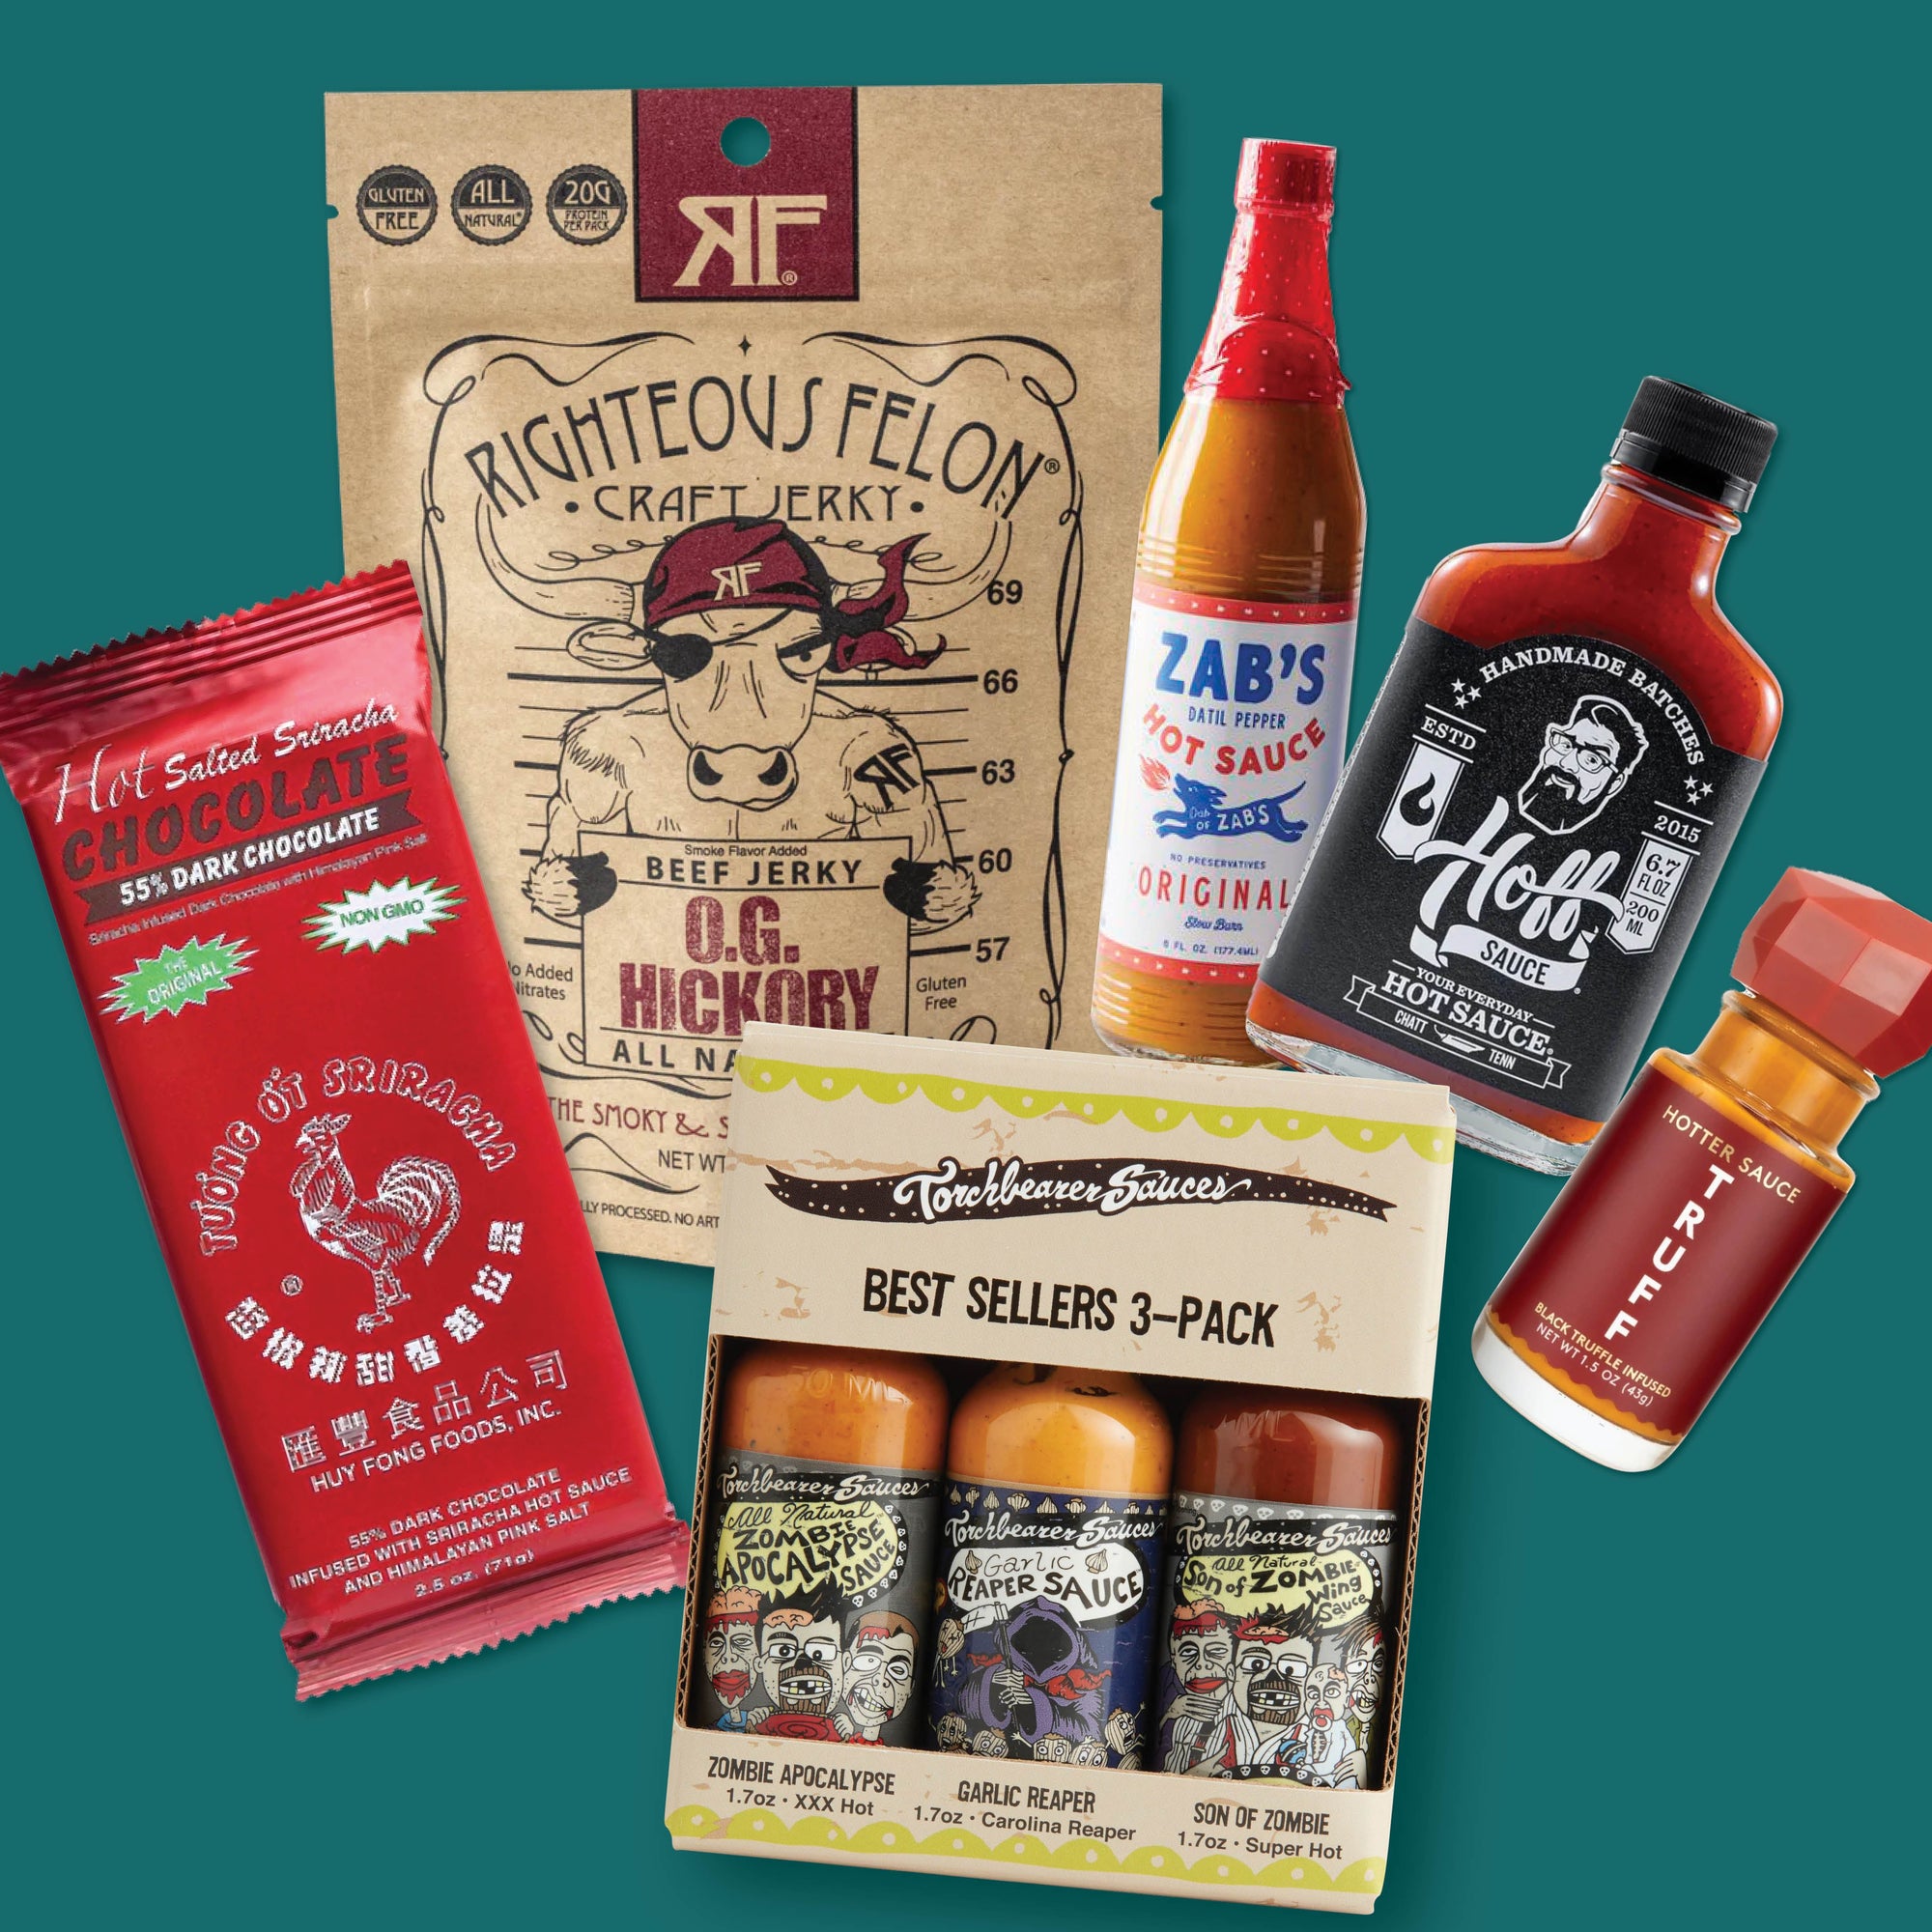 Look What You Did You Little Jerk! Hot Sauce + Jerky Gift Box